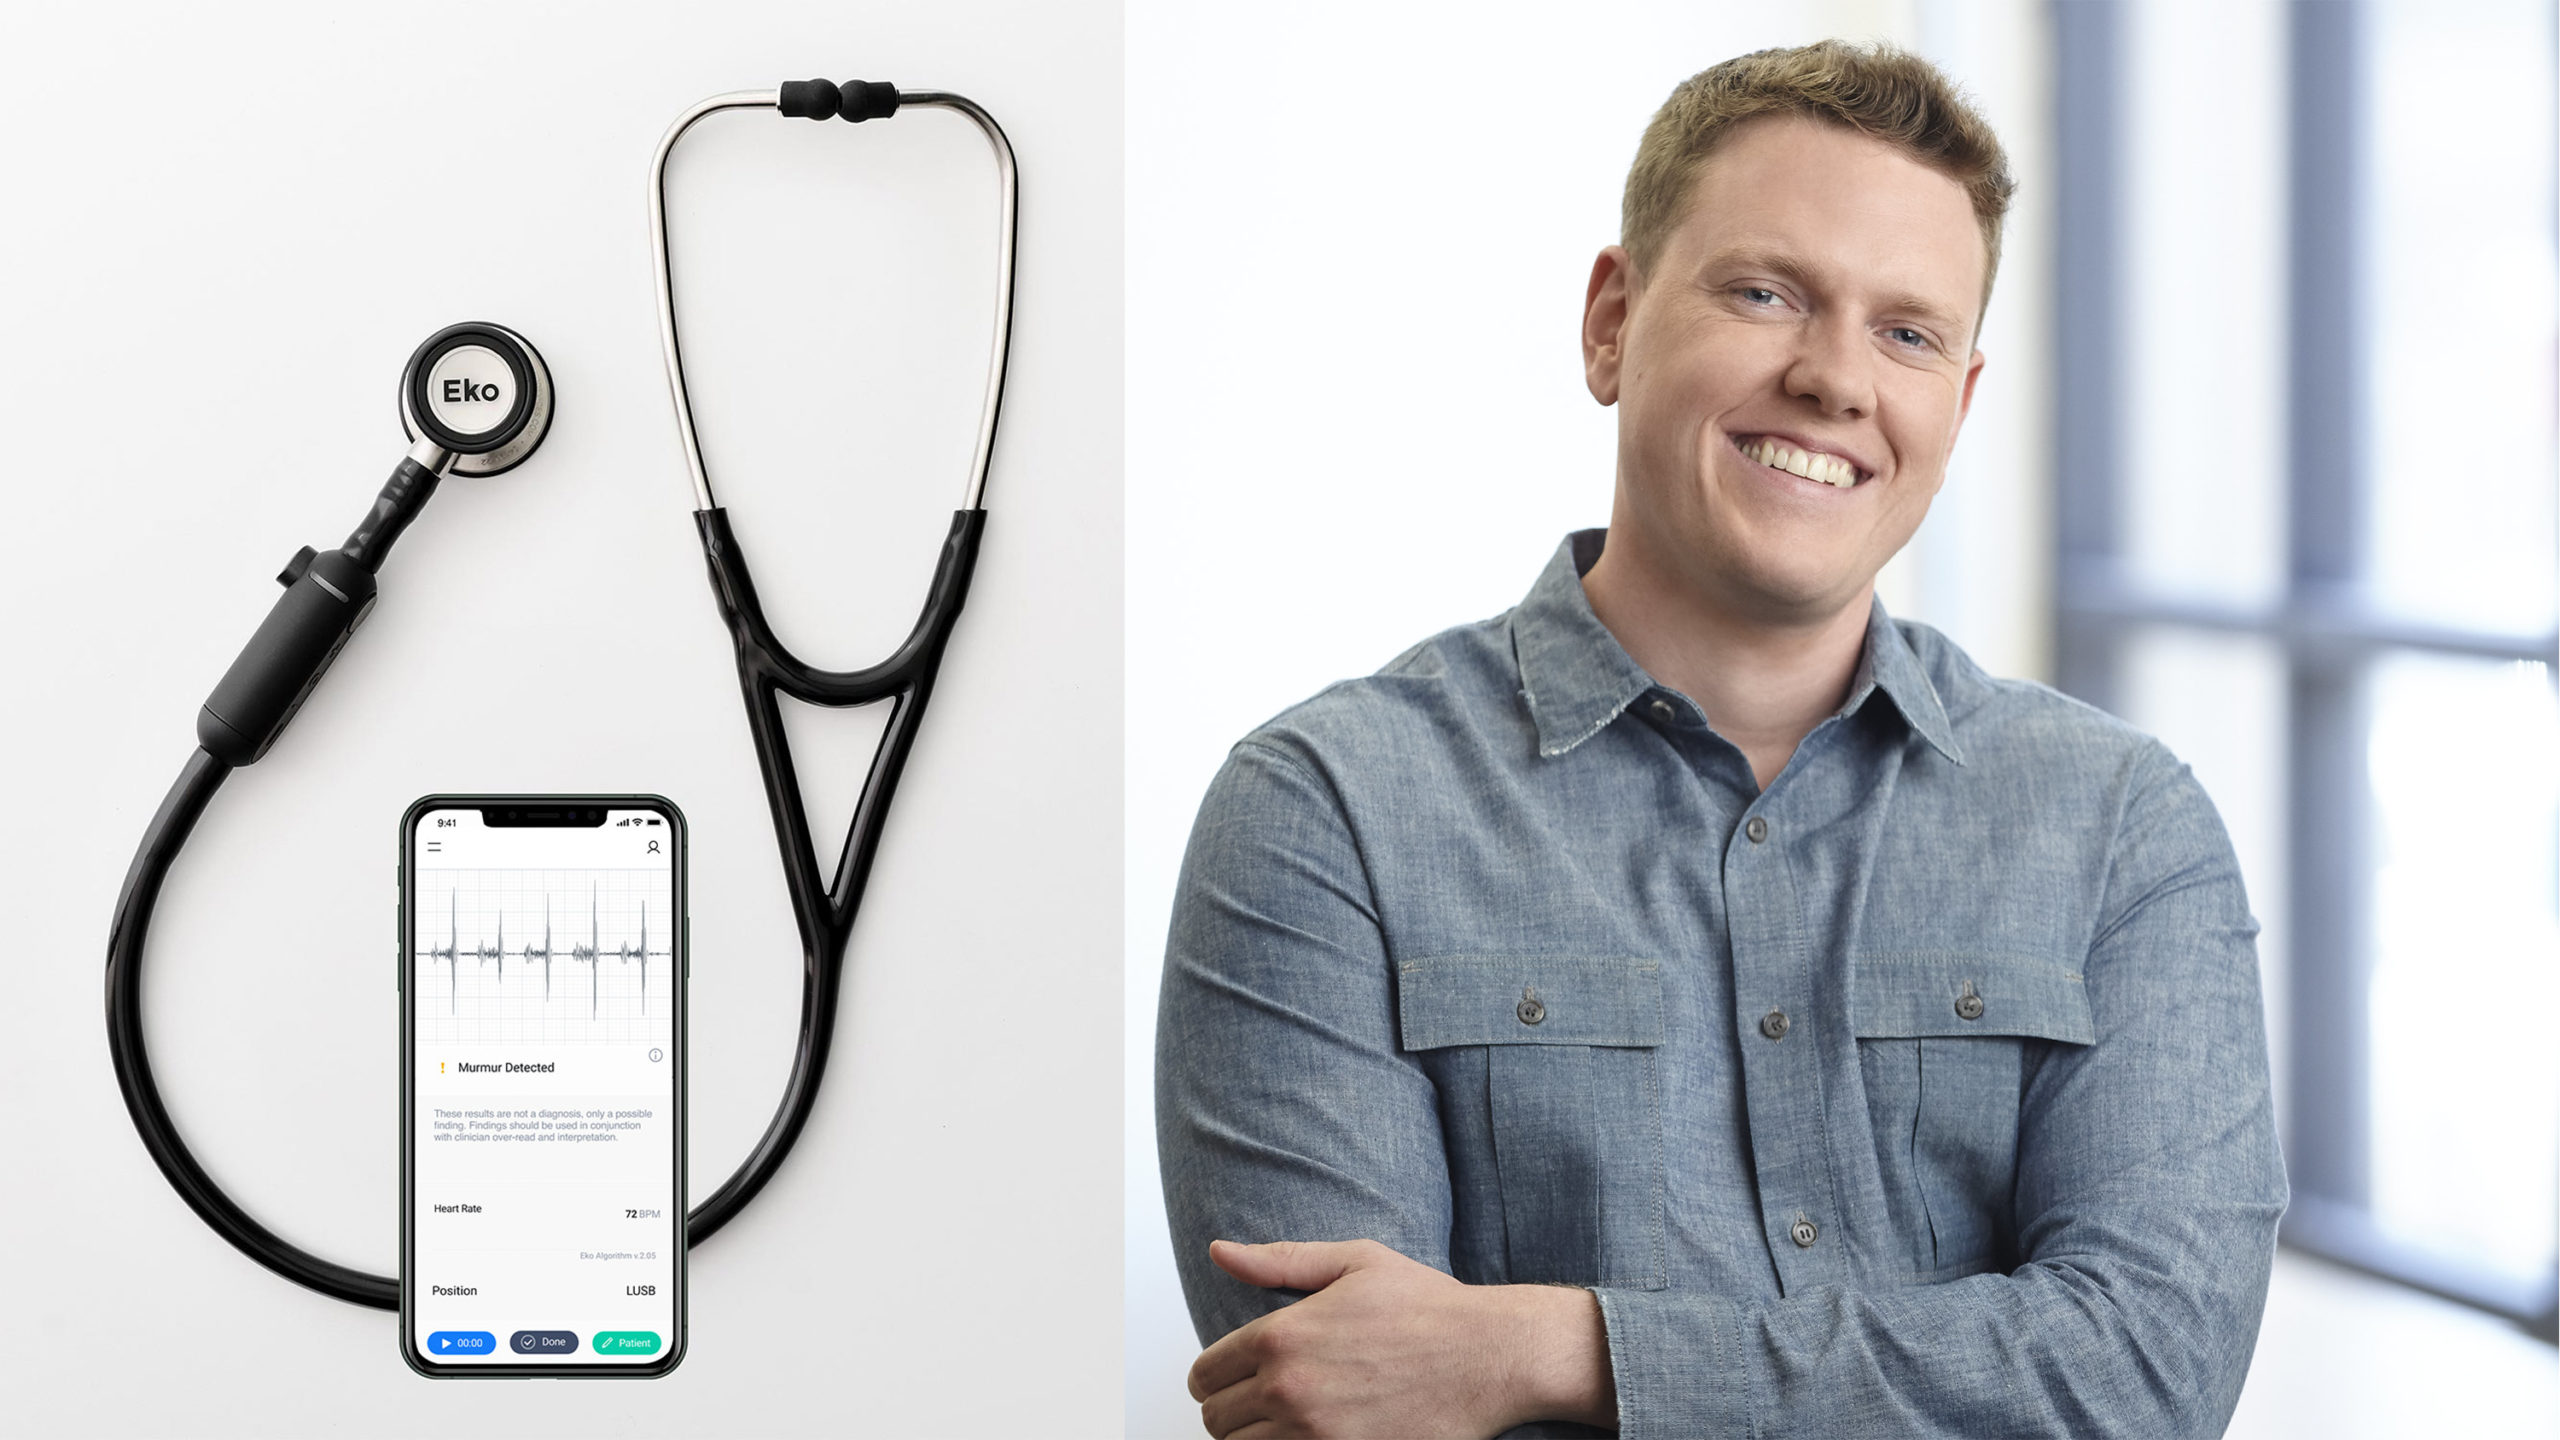 Eko stethoscope and co-founder Tyler Crouch